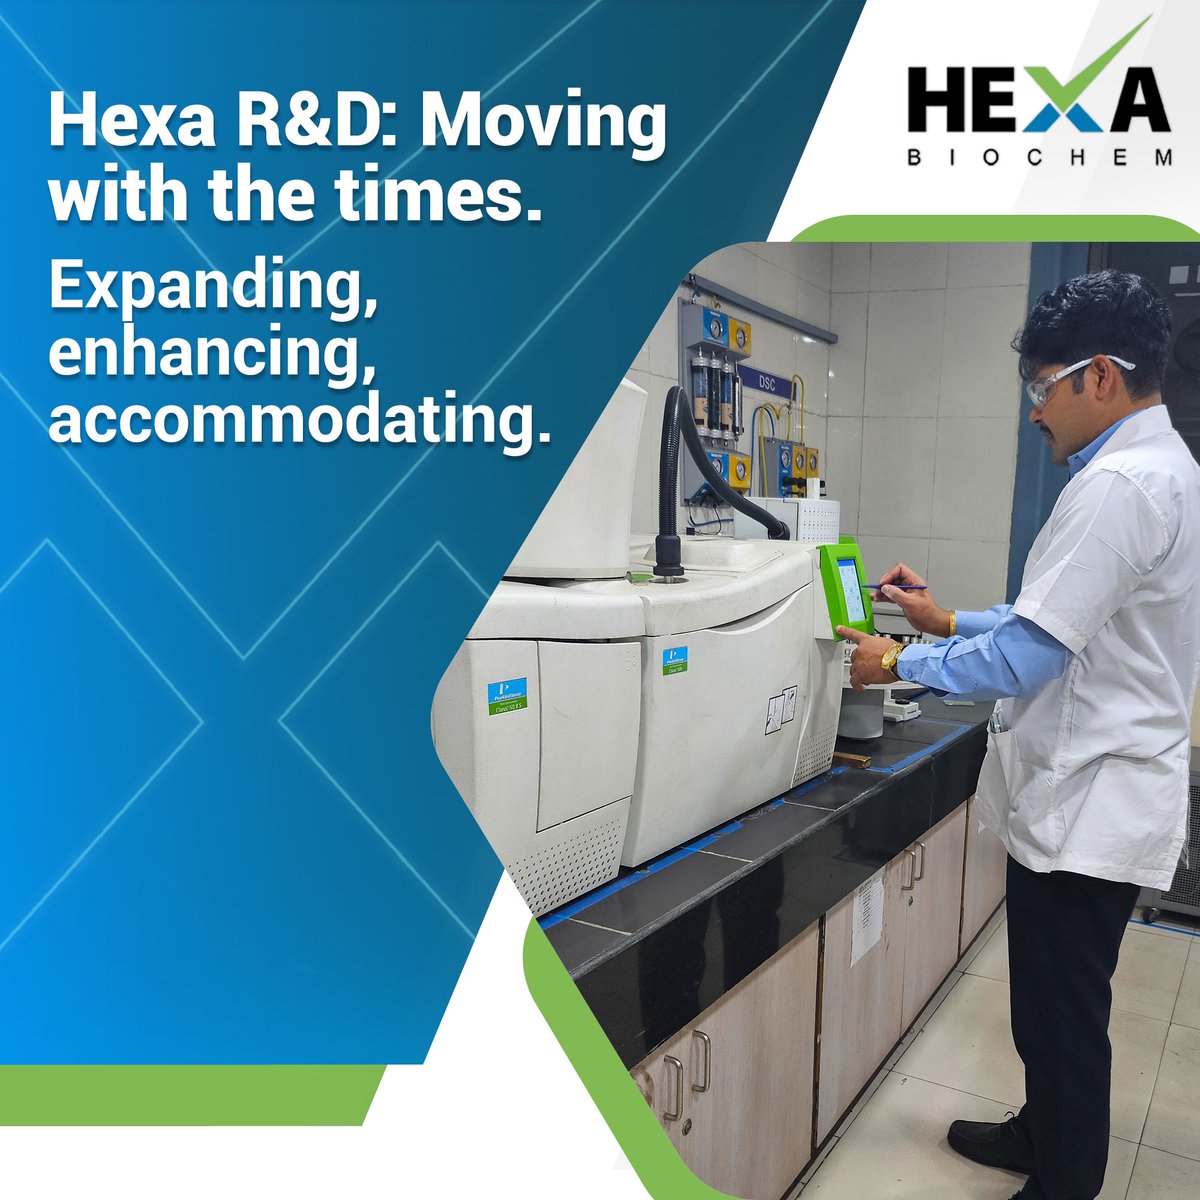 Hexa R&D facility has been a state of the art chemical laboratory space for co-working and imparting value to its commitment towards its customers. #hexabiochem #hexachem #chemicals #hexaworking #hexafacility #hexasolution #hexalab #hexainnovation #hexabiochemsolution